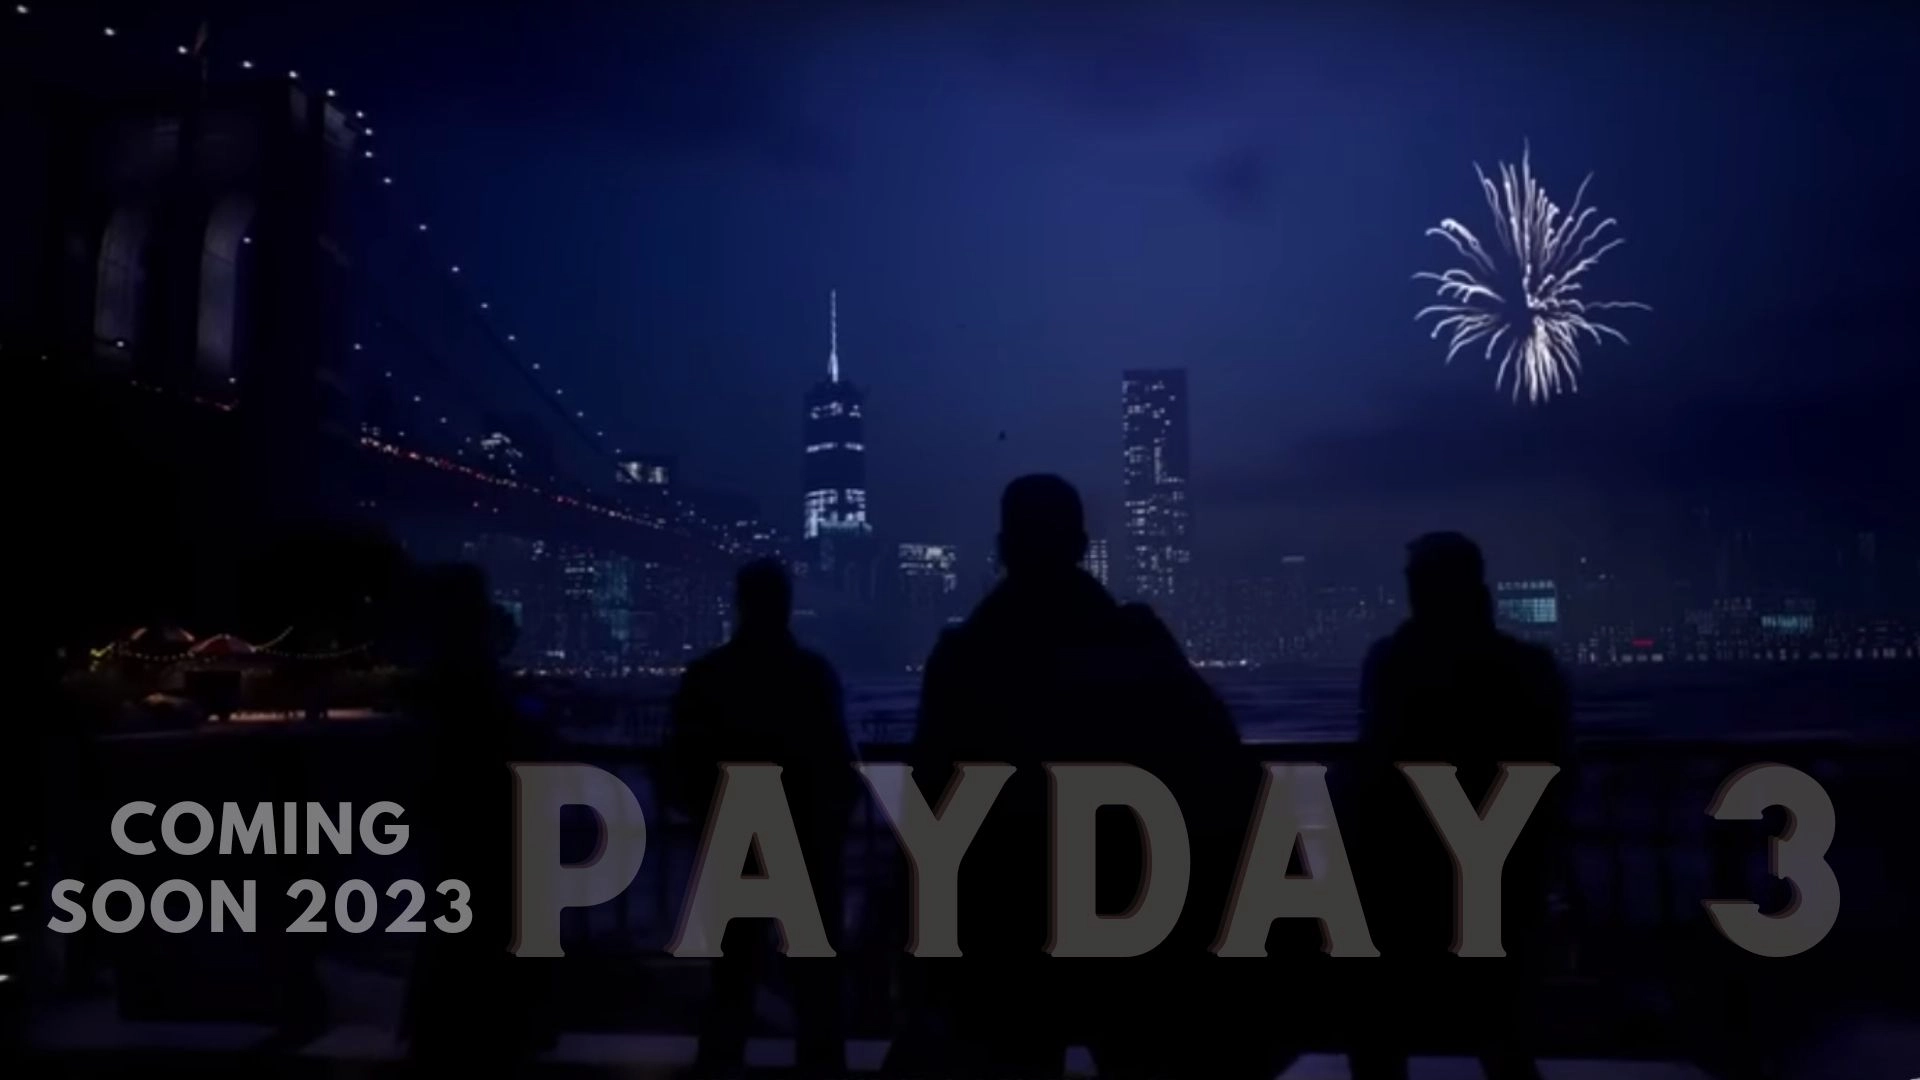 PayDay 3 Parents Guide and Age Rating (2023)